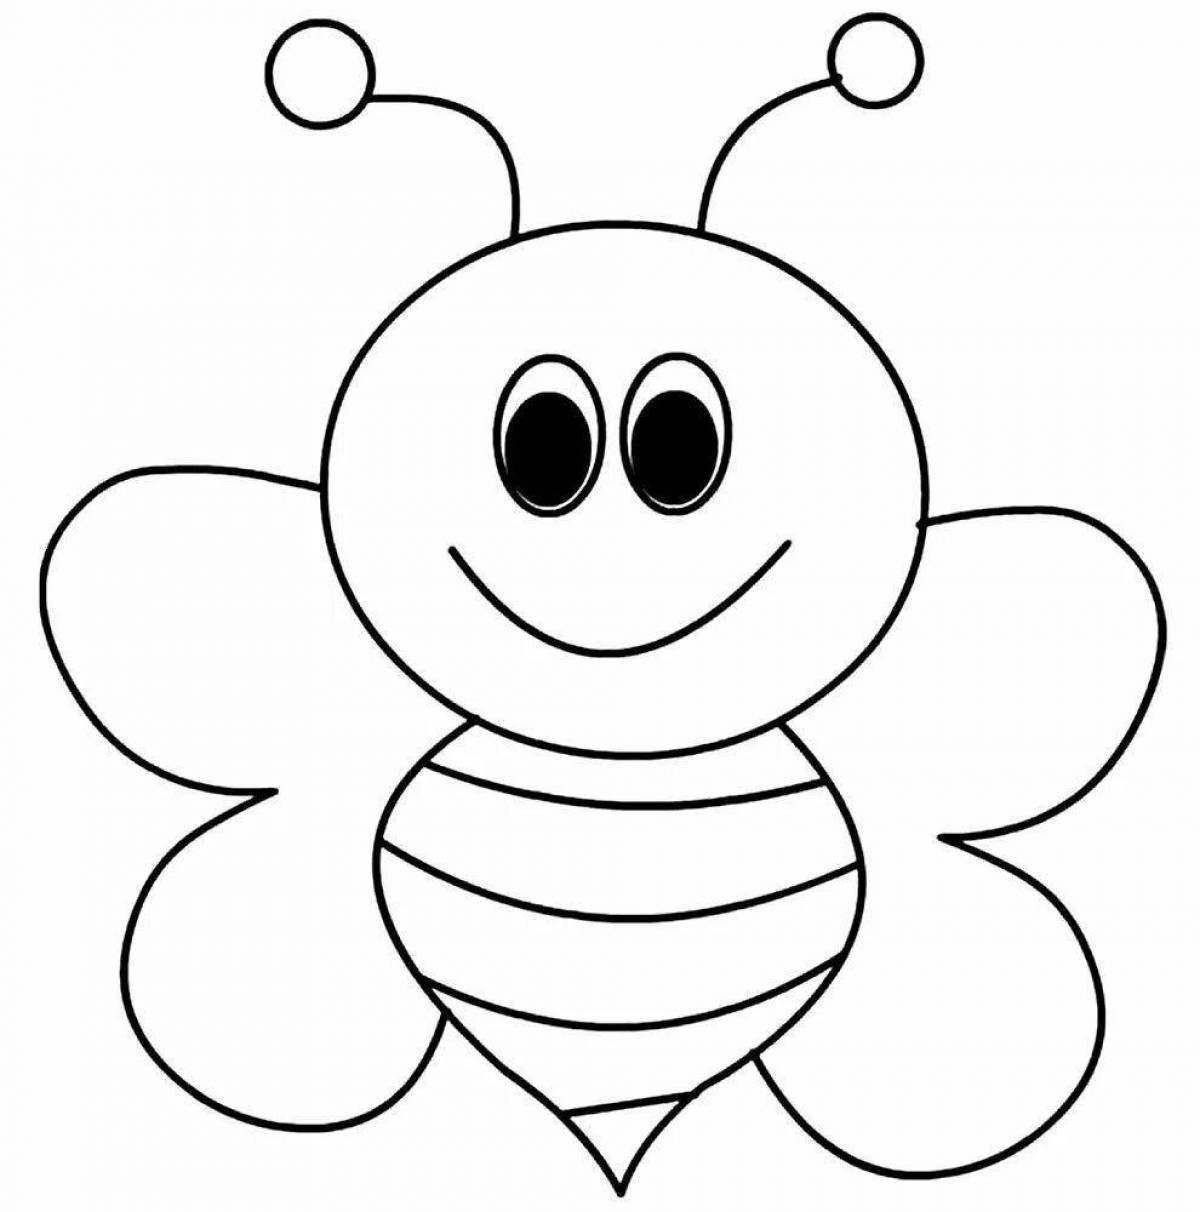 Animated bee coloring page for 3-4 year olds